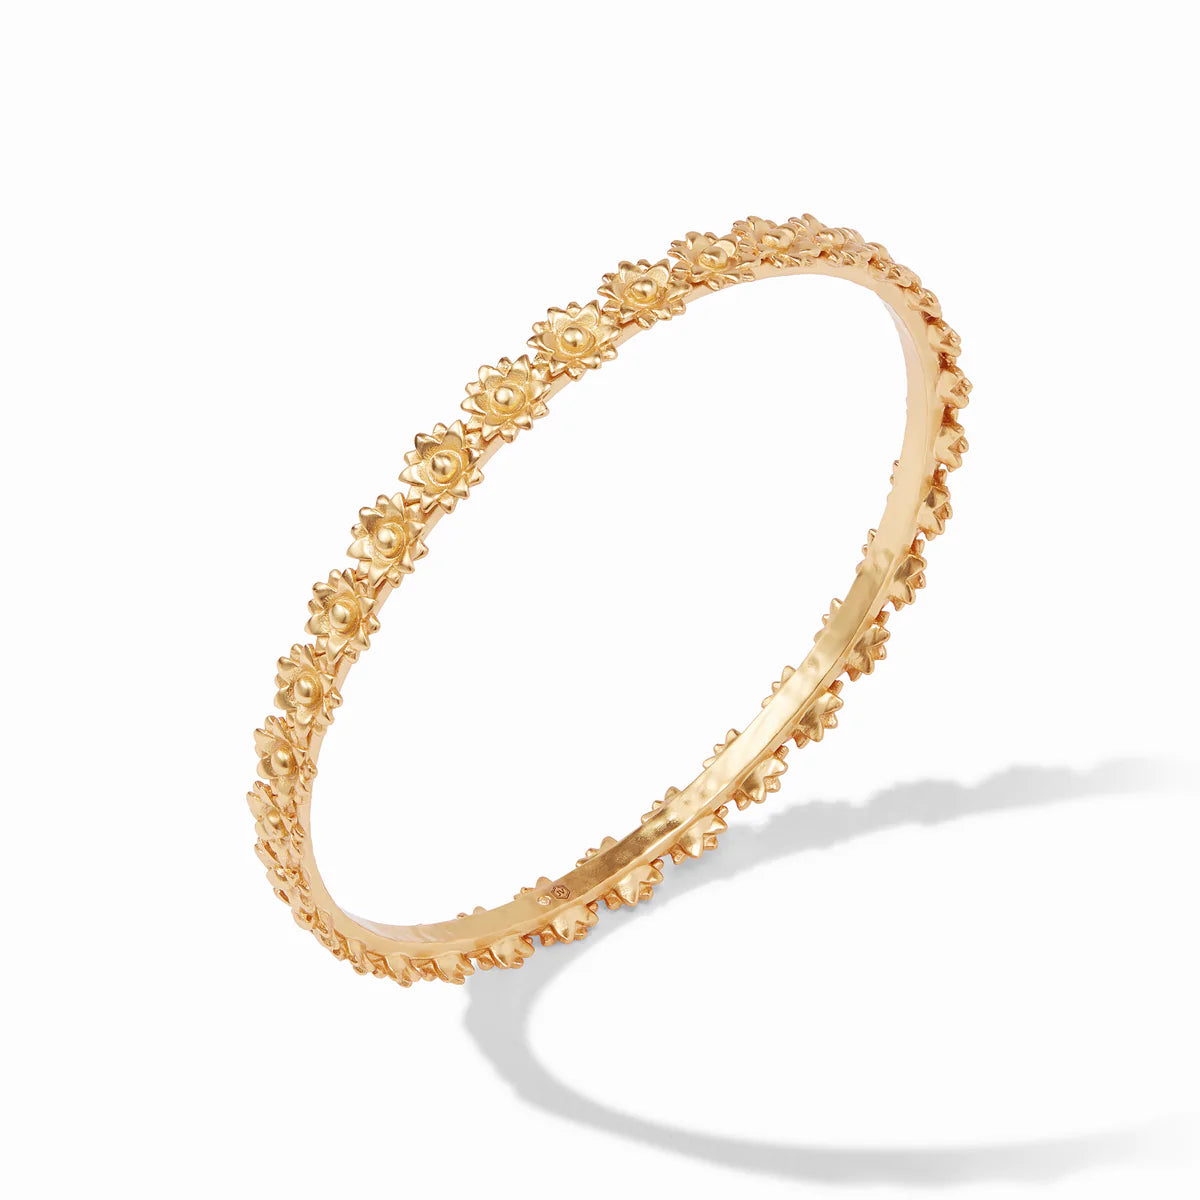 Flora Stacking Bangle by Julie Vos. Gold-plated daisy chain makes this bangle feel fresh, fun, and even better in multiples. Shop at The Painted Cottage in Edgewater, MD.